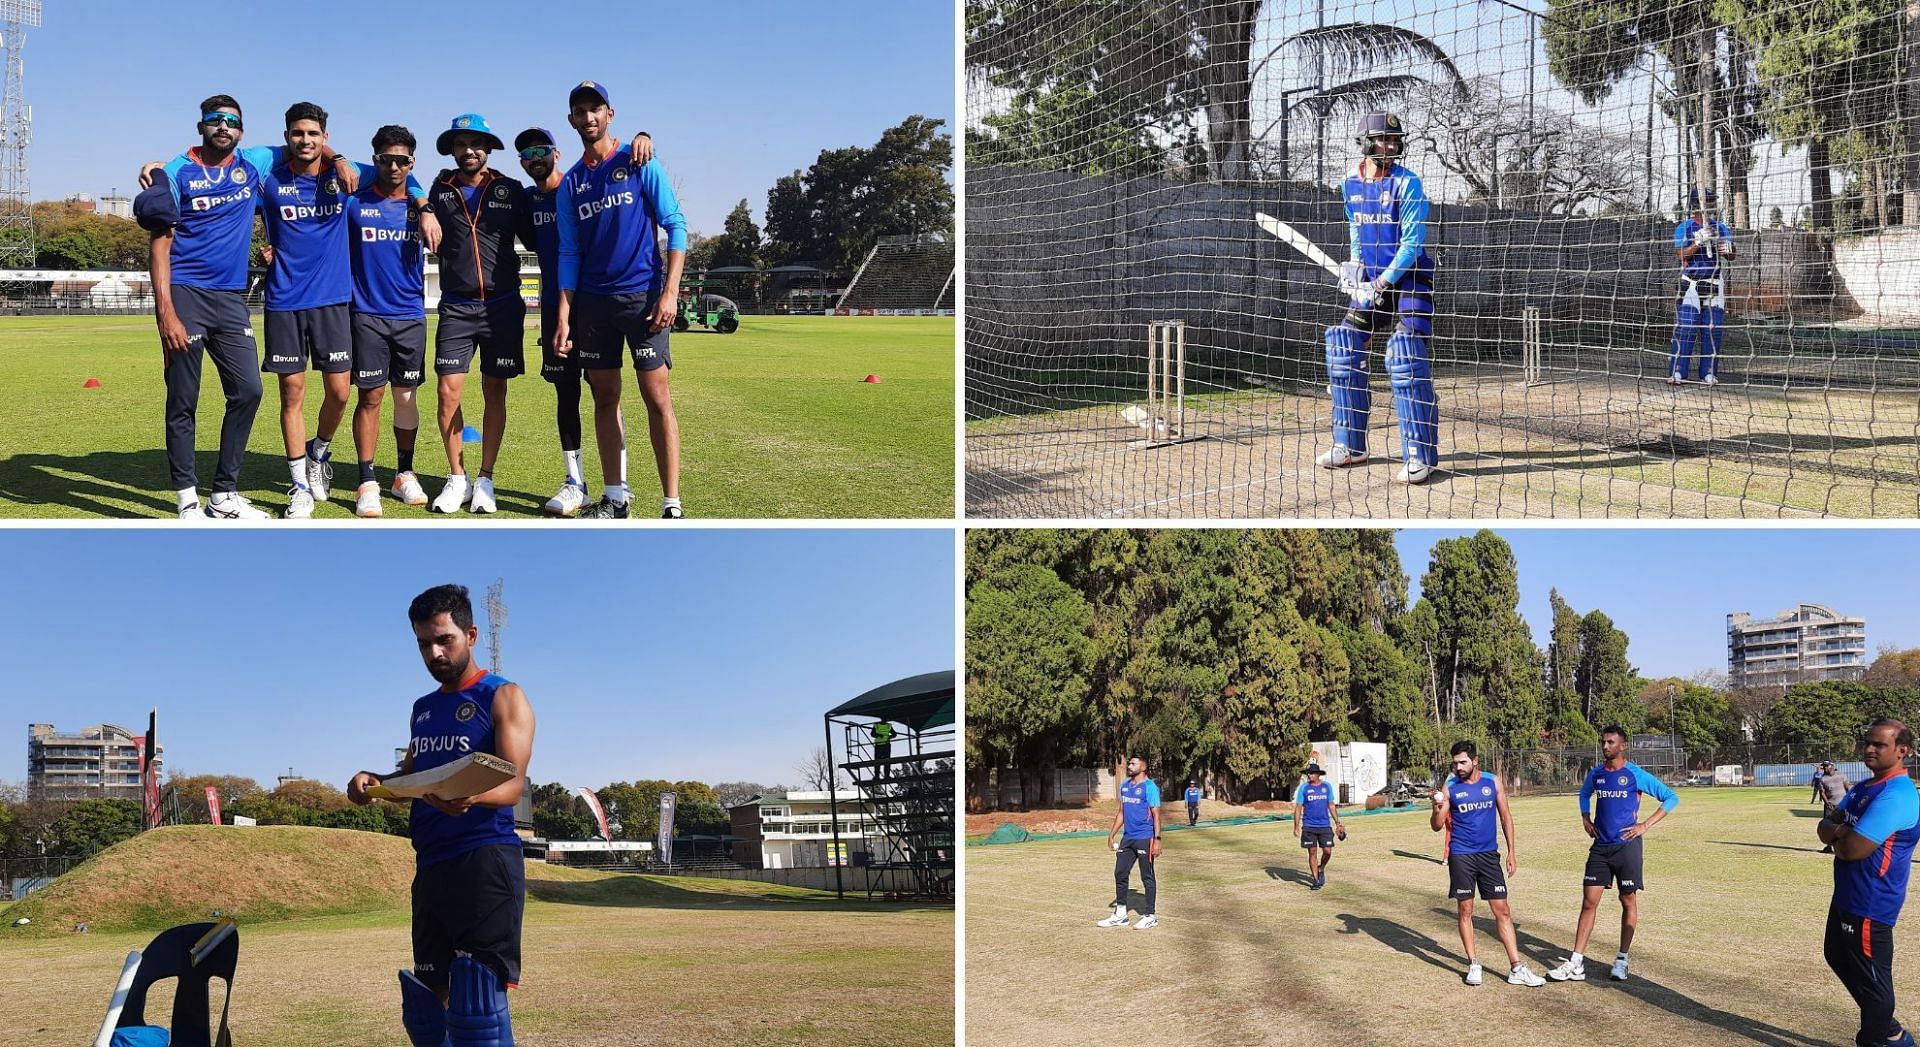 The Men in Blue gearing up for the ODI series. [Pic credits: BCCI]